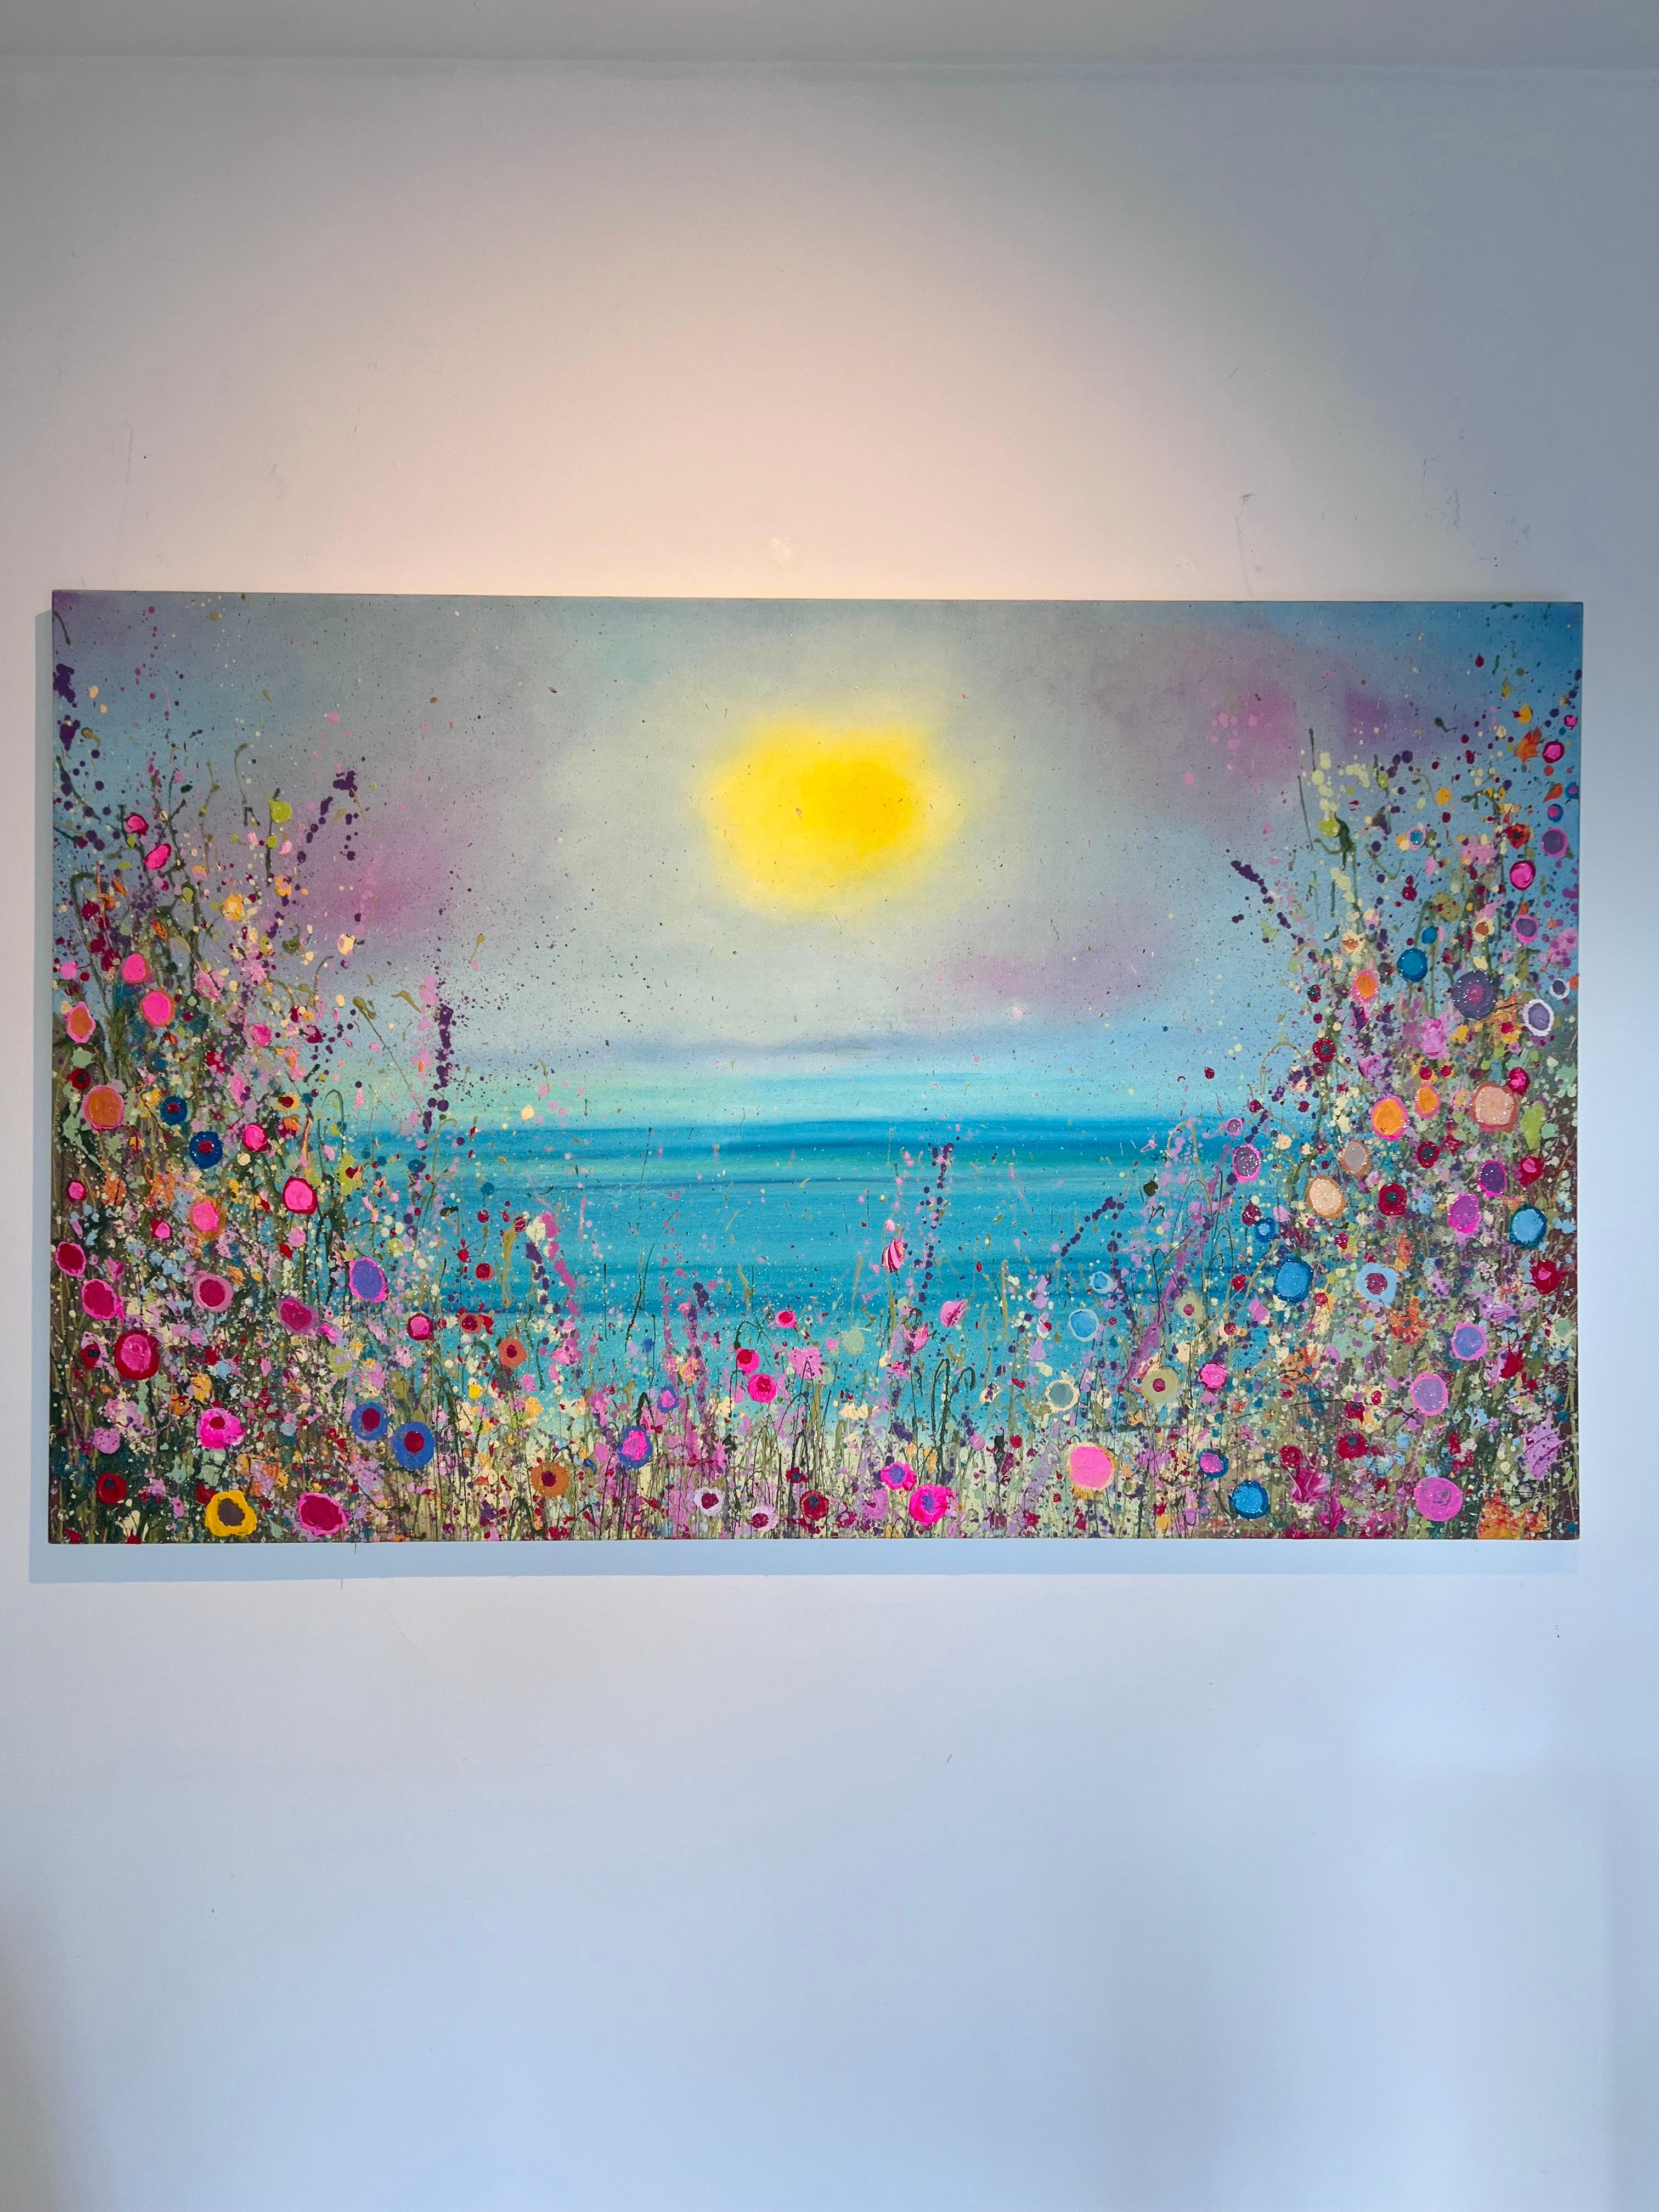 Let The Magic In - original abstract oil floral scape painting Contemporary art - Painting by Yvonne Coomber